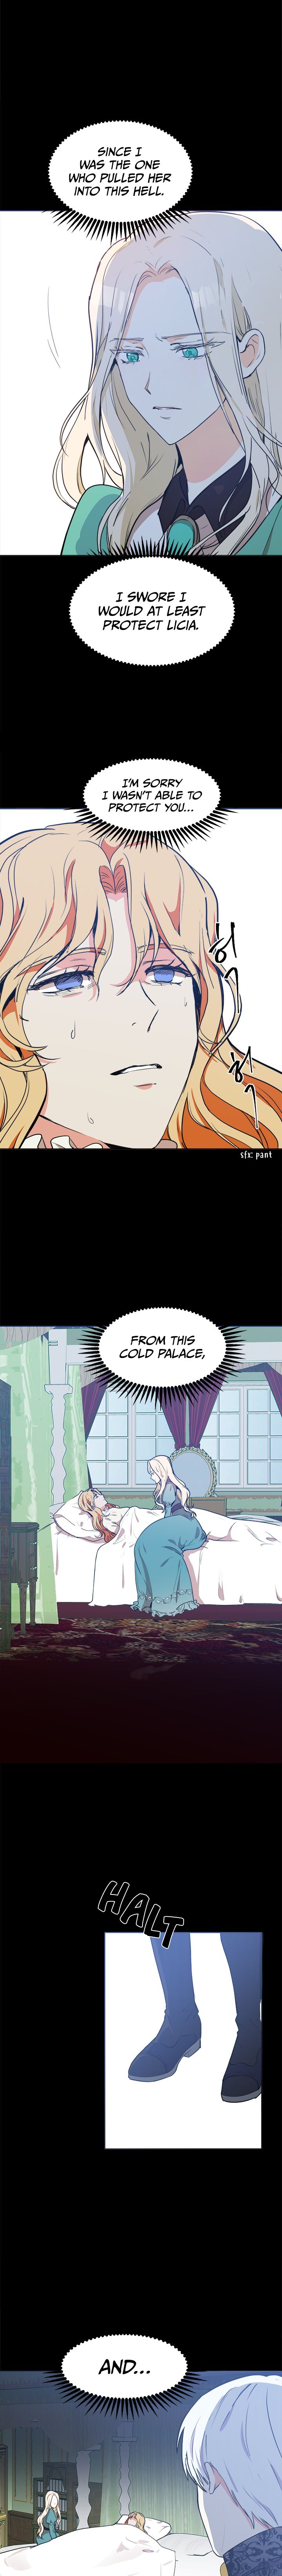 The Villainess Lives Twice - Chapter 2 Page 15